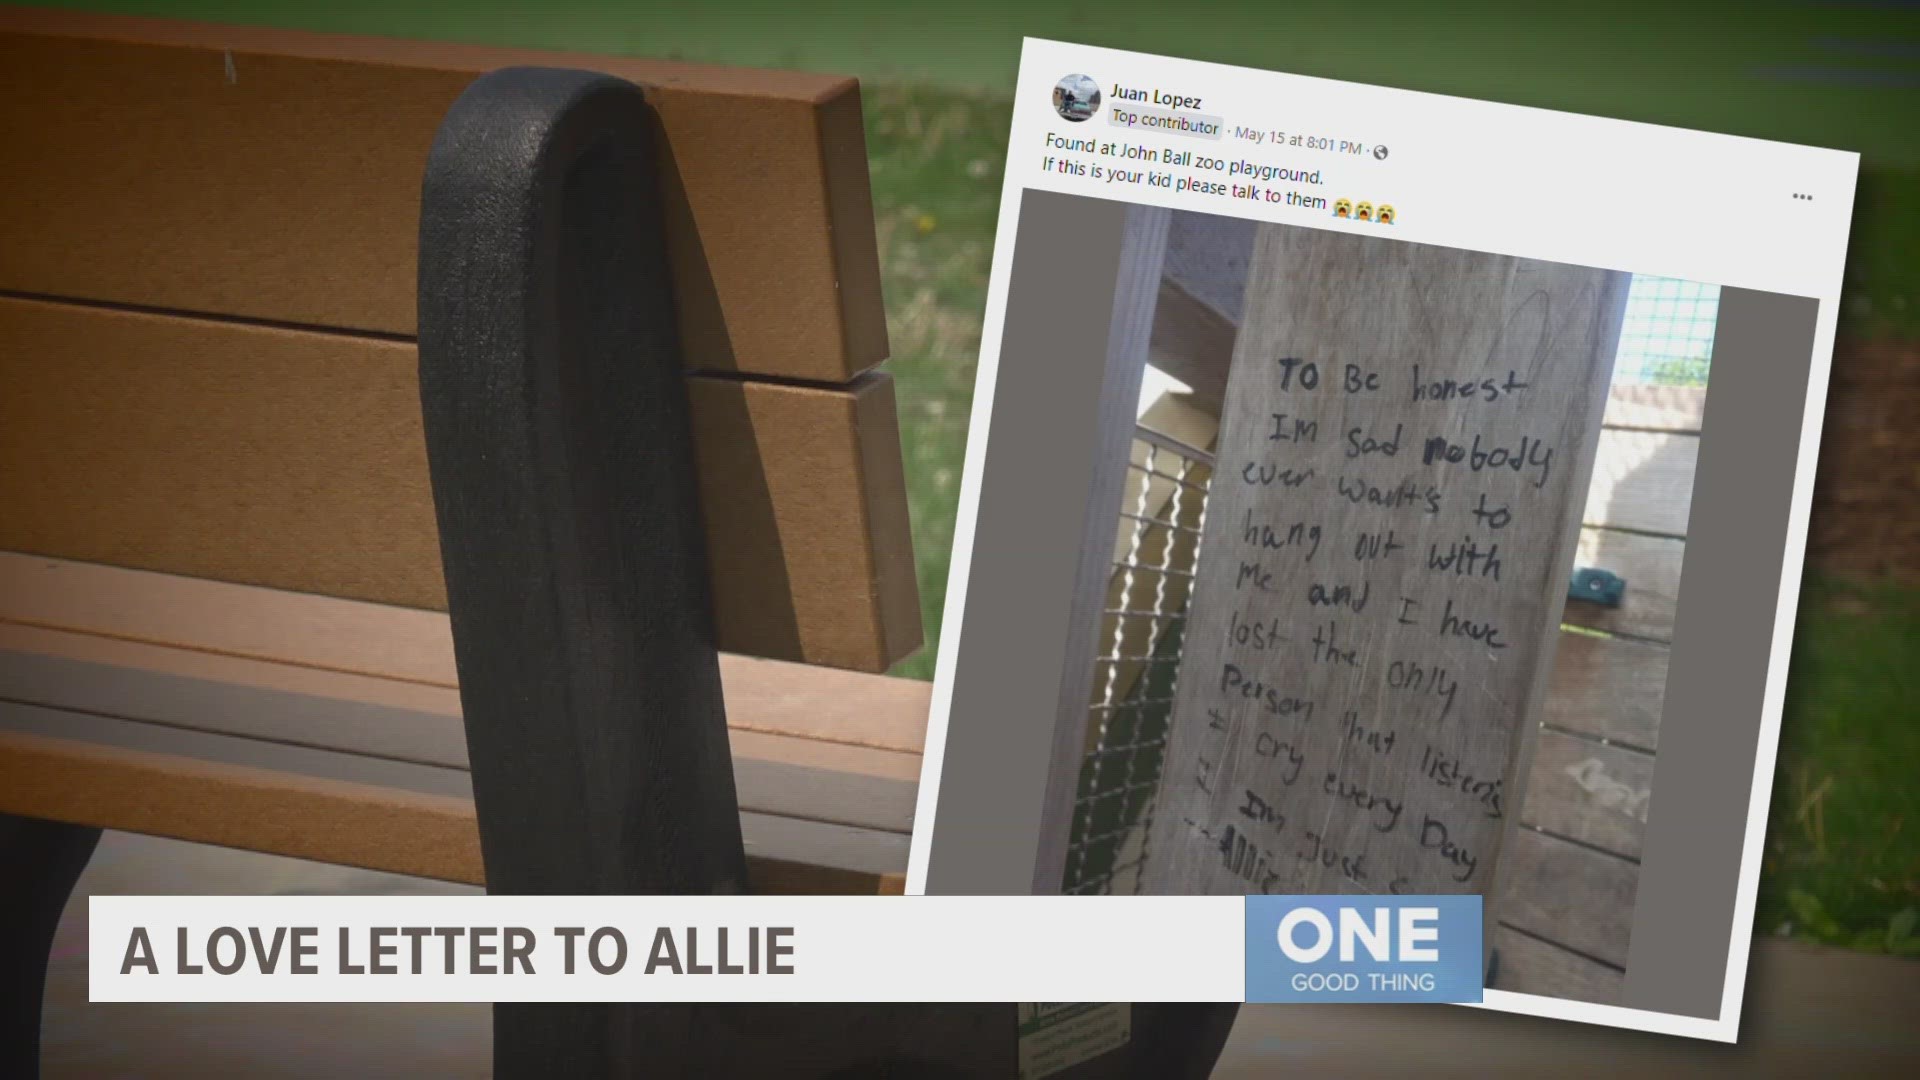 Westside neighbors are rallying around someone who left a heartbreaking note on the playground at John Ball Park.